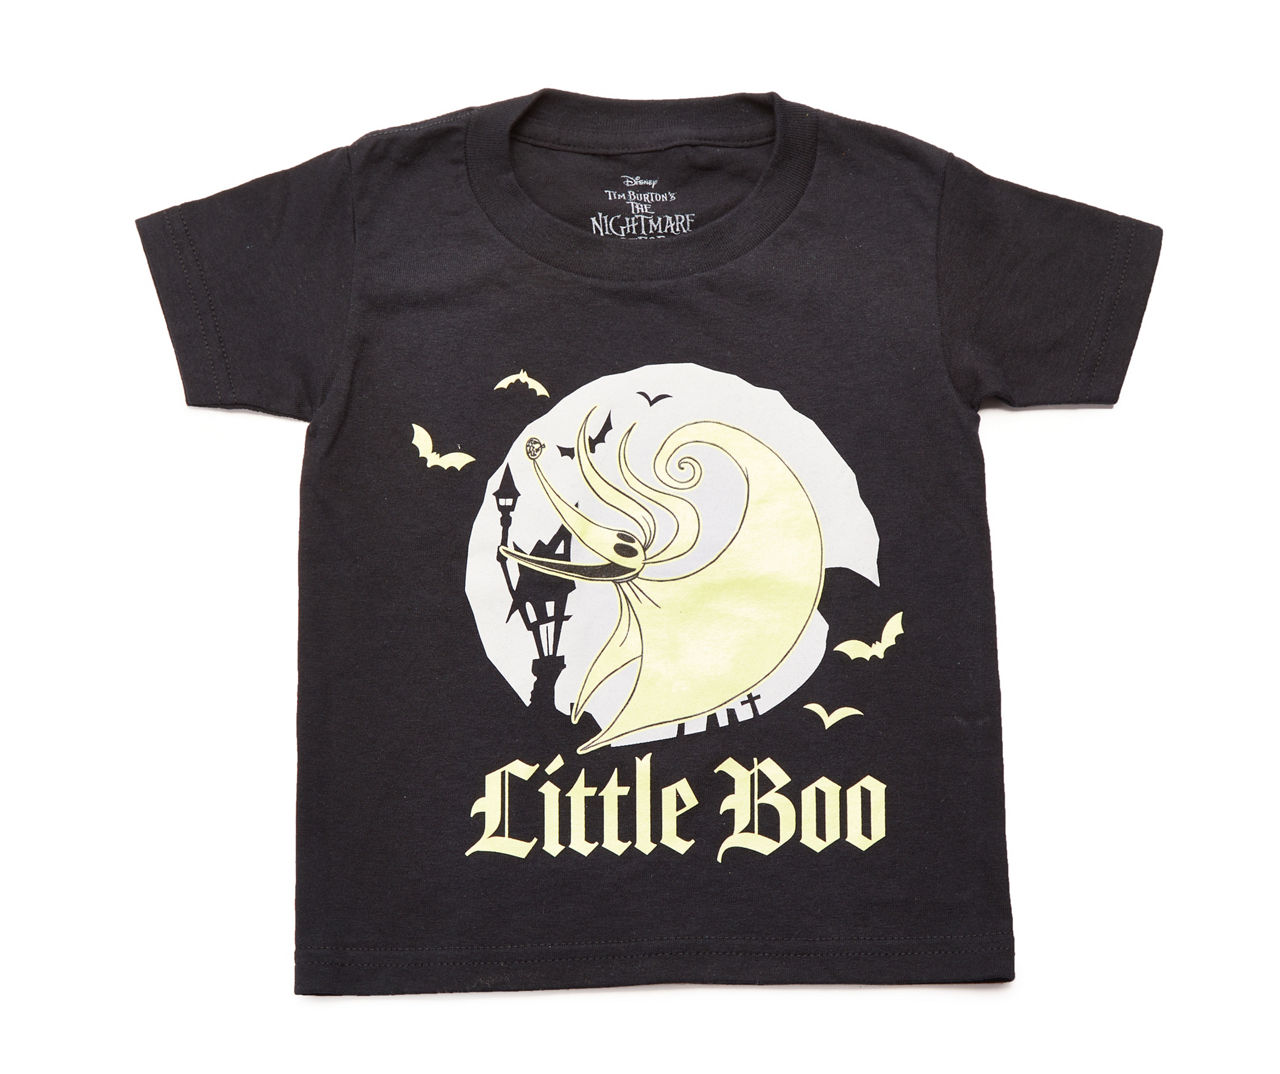 Toddler Size 2T Nightmare Before Christmas "Little Boo" Black Glow Graphic Tee